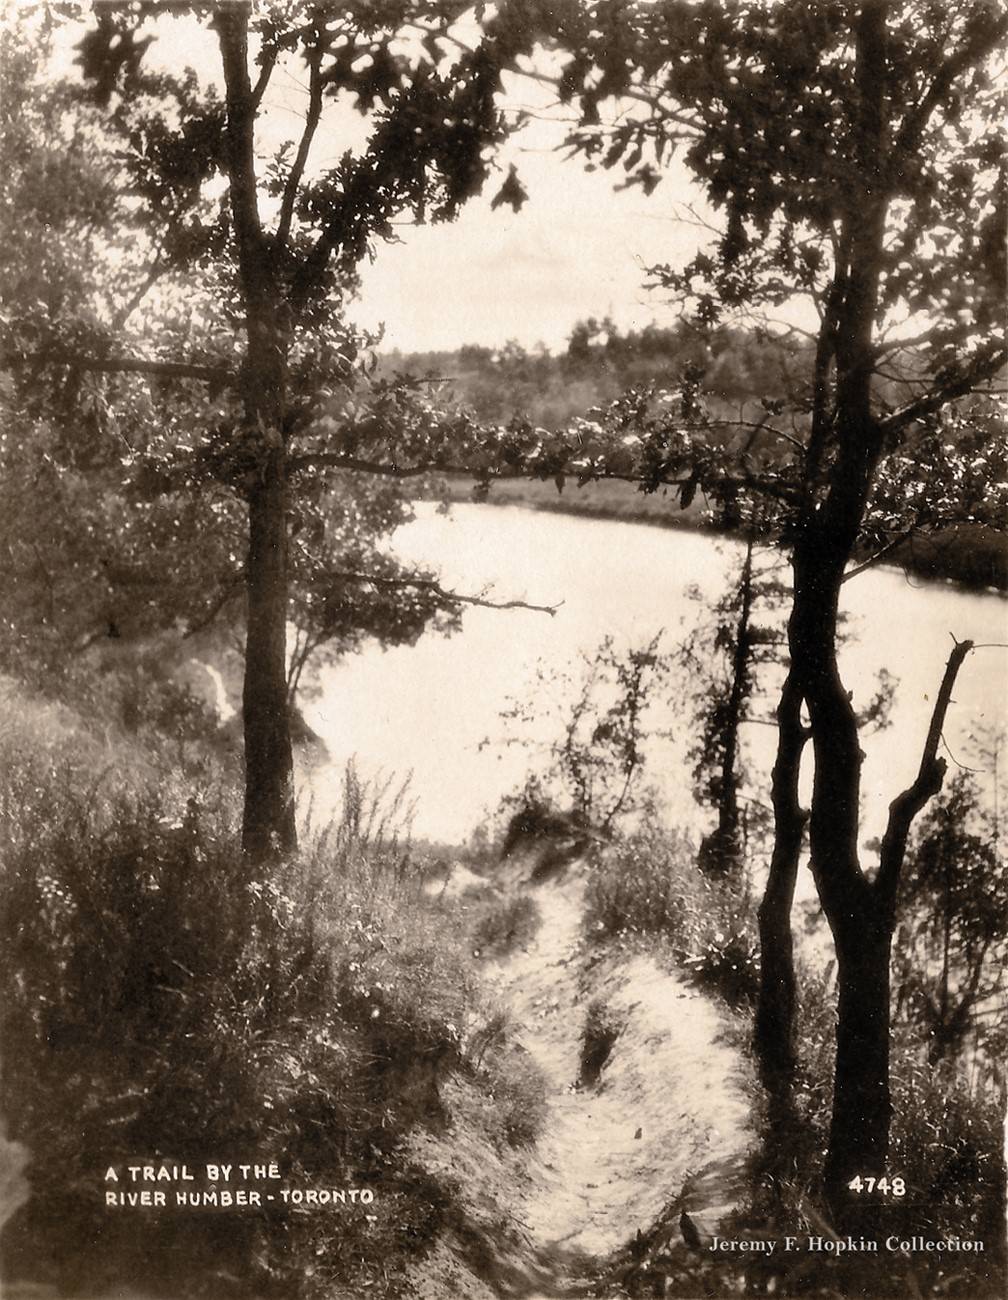 A trail by the River Humber, 1920.